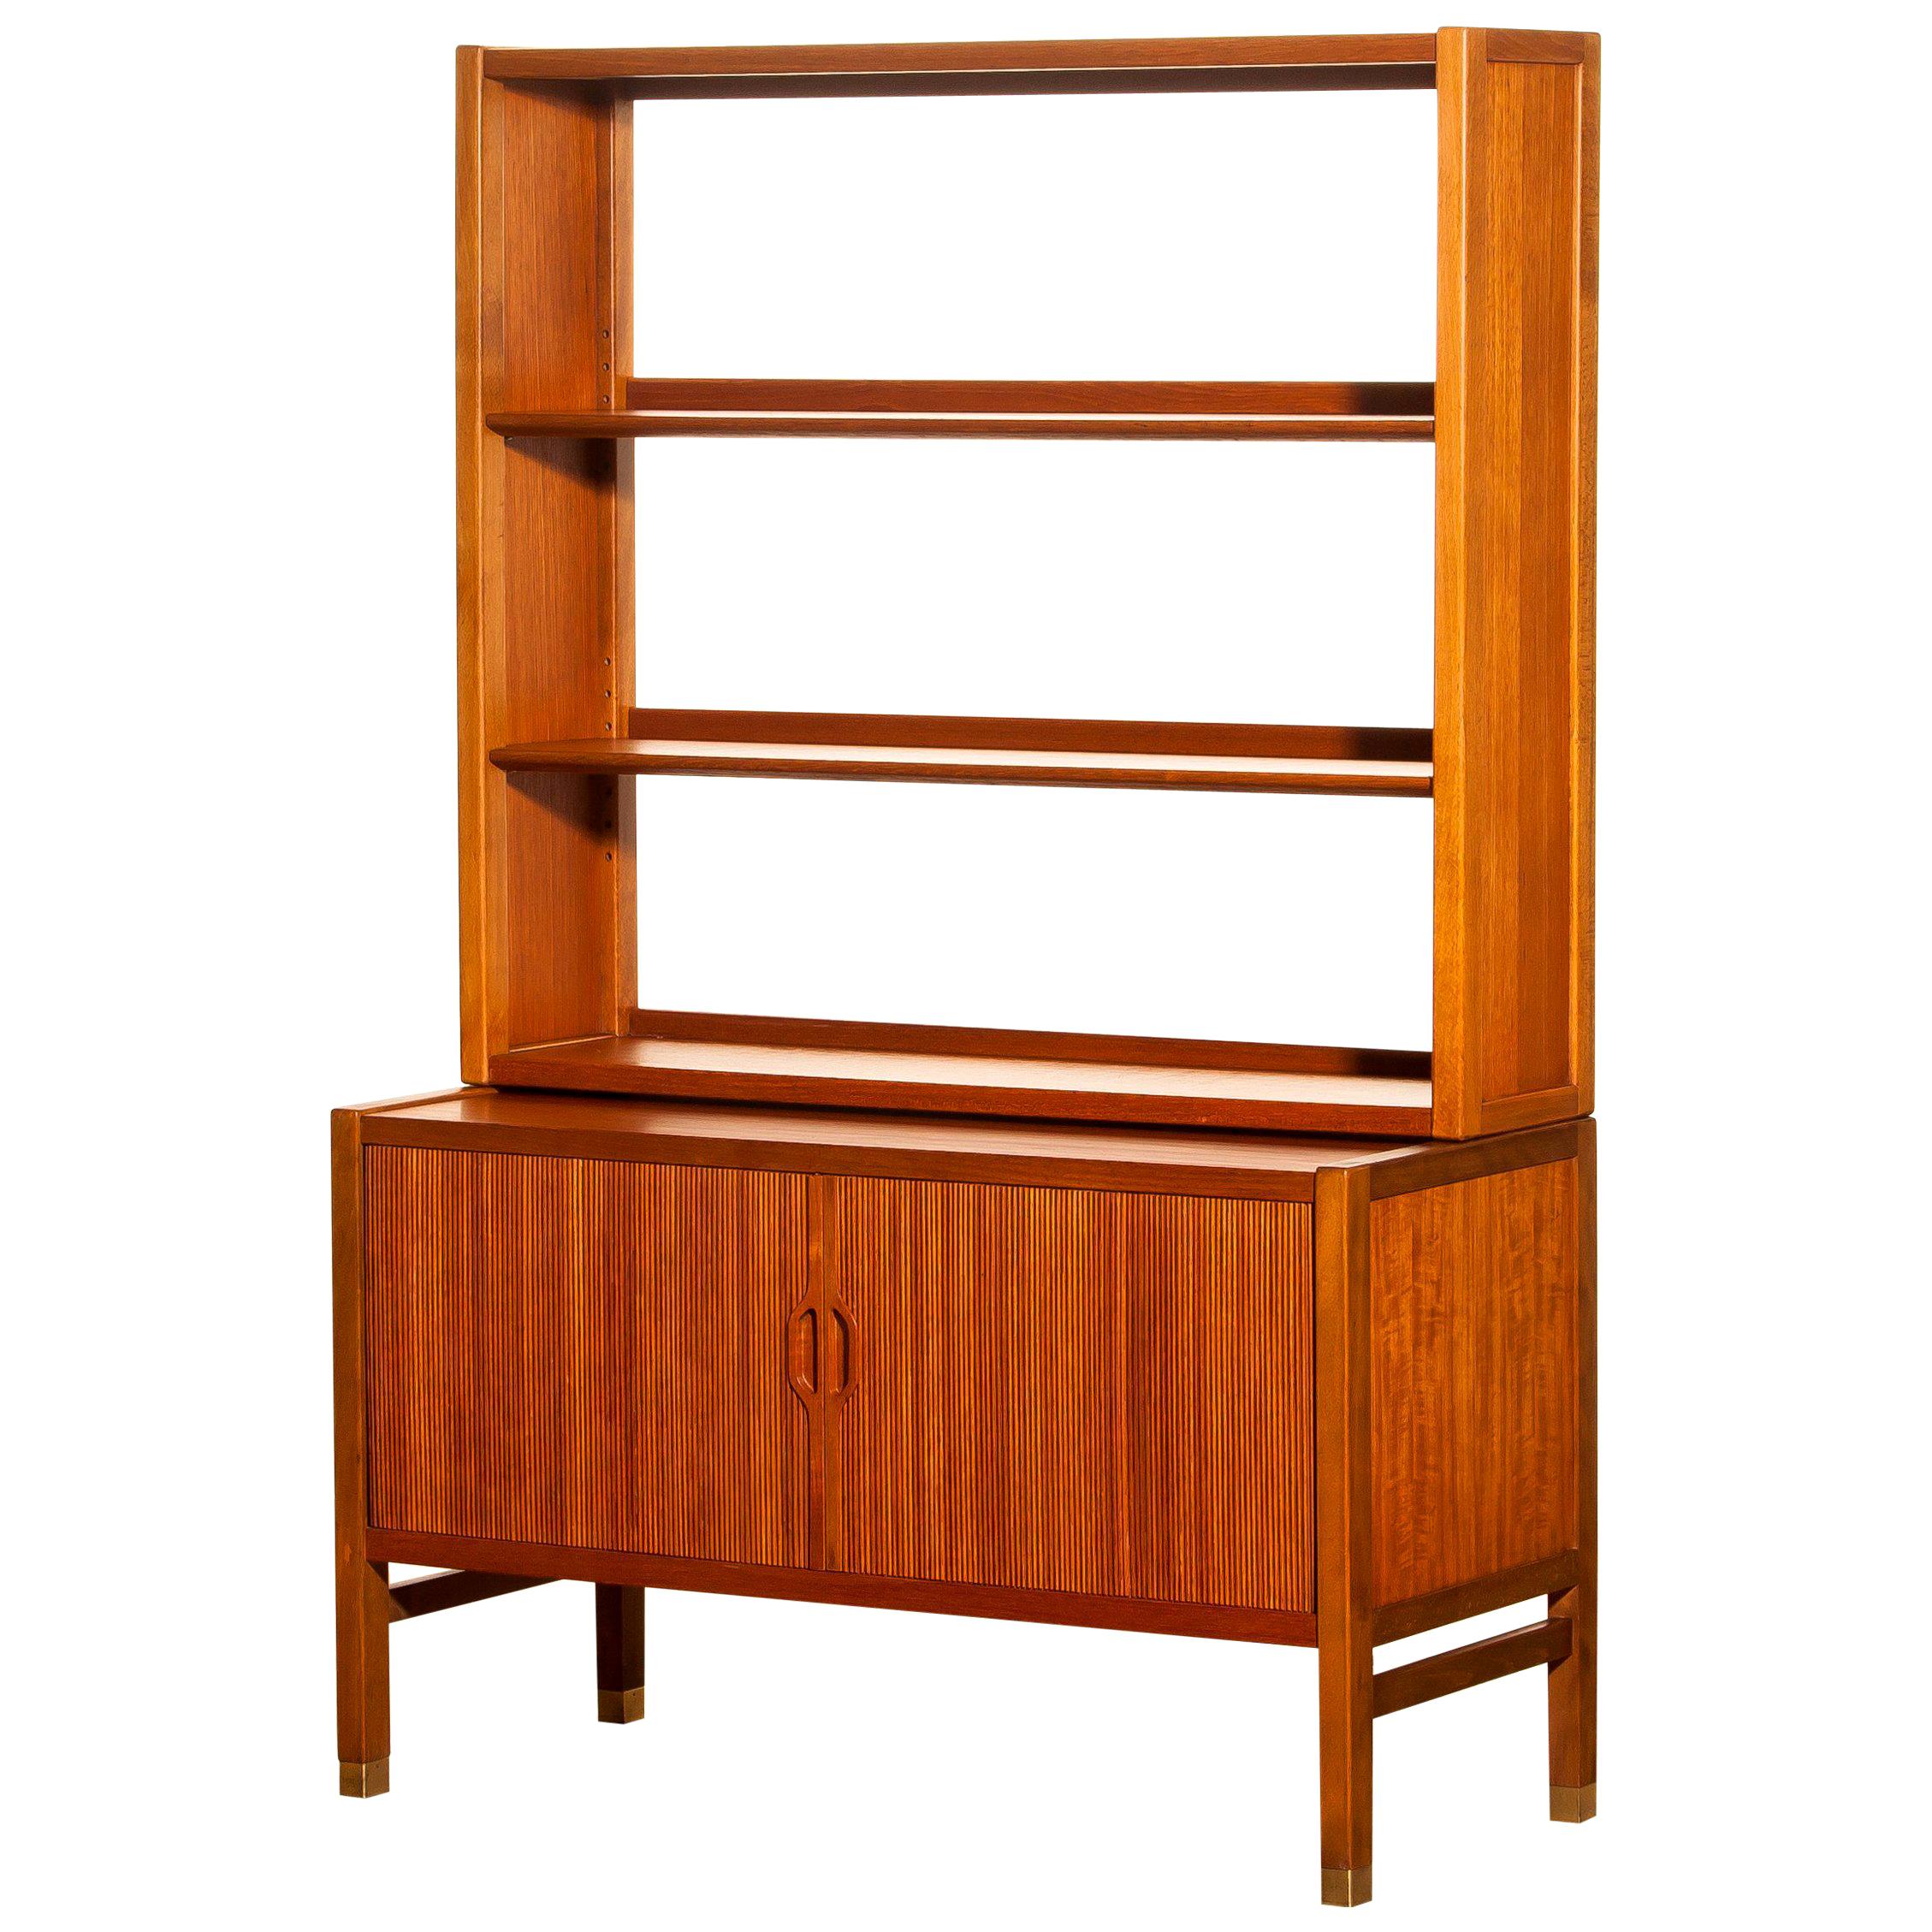 Very beautiful and elegant teak cabinet with tambour doors by Carl-Axel Acking for Bodafors, Sweden.
The lower part of the cabinet has two tambour doors and inside an adjustable shelf. The top part has two adjustable shelves. All in perfect